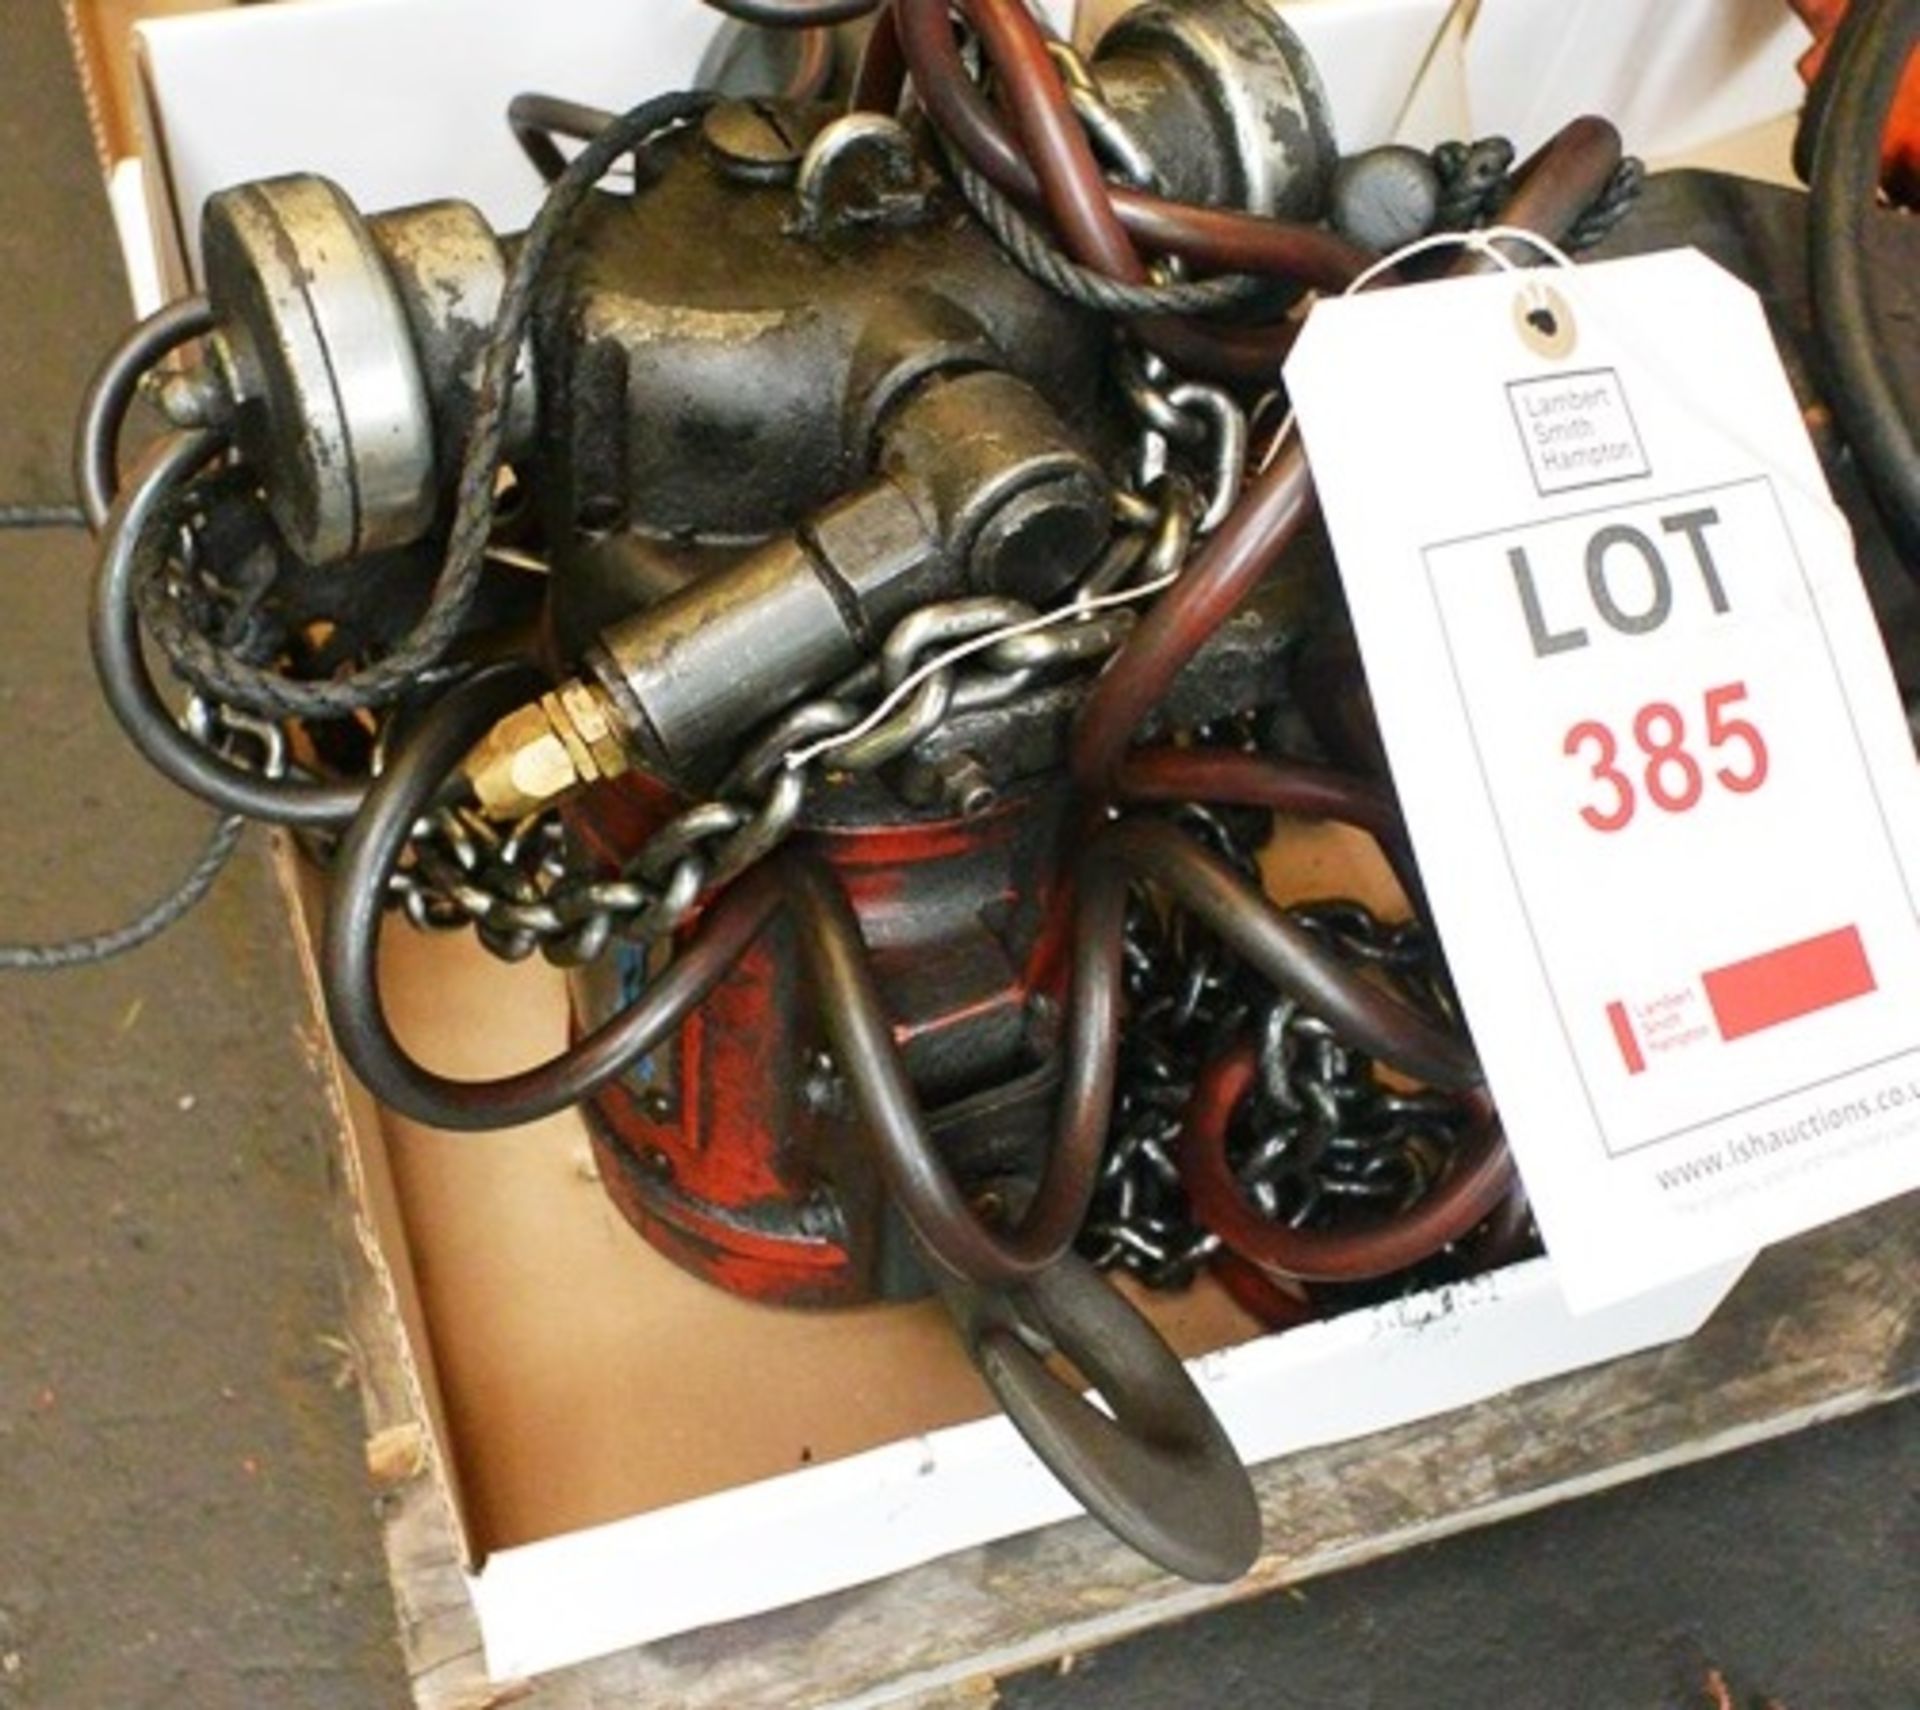 Electric chain hoist, 10 CWT (Recommended collection period for this lot Wednesday 15th - Friday